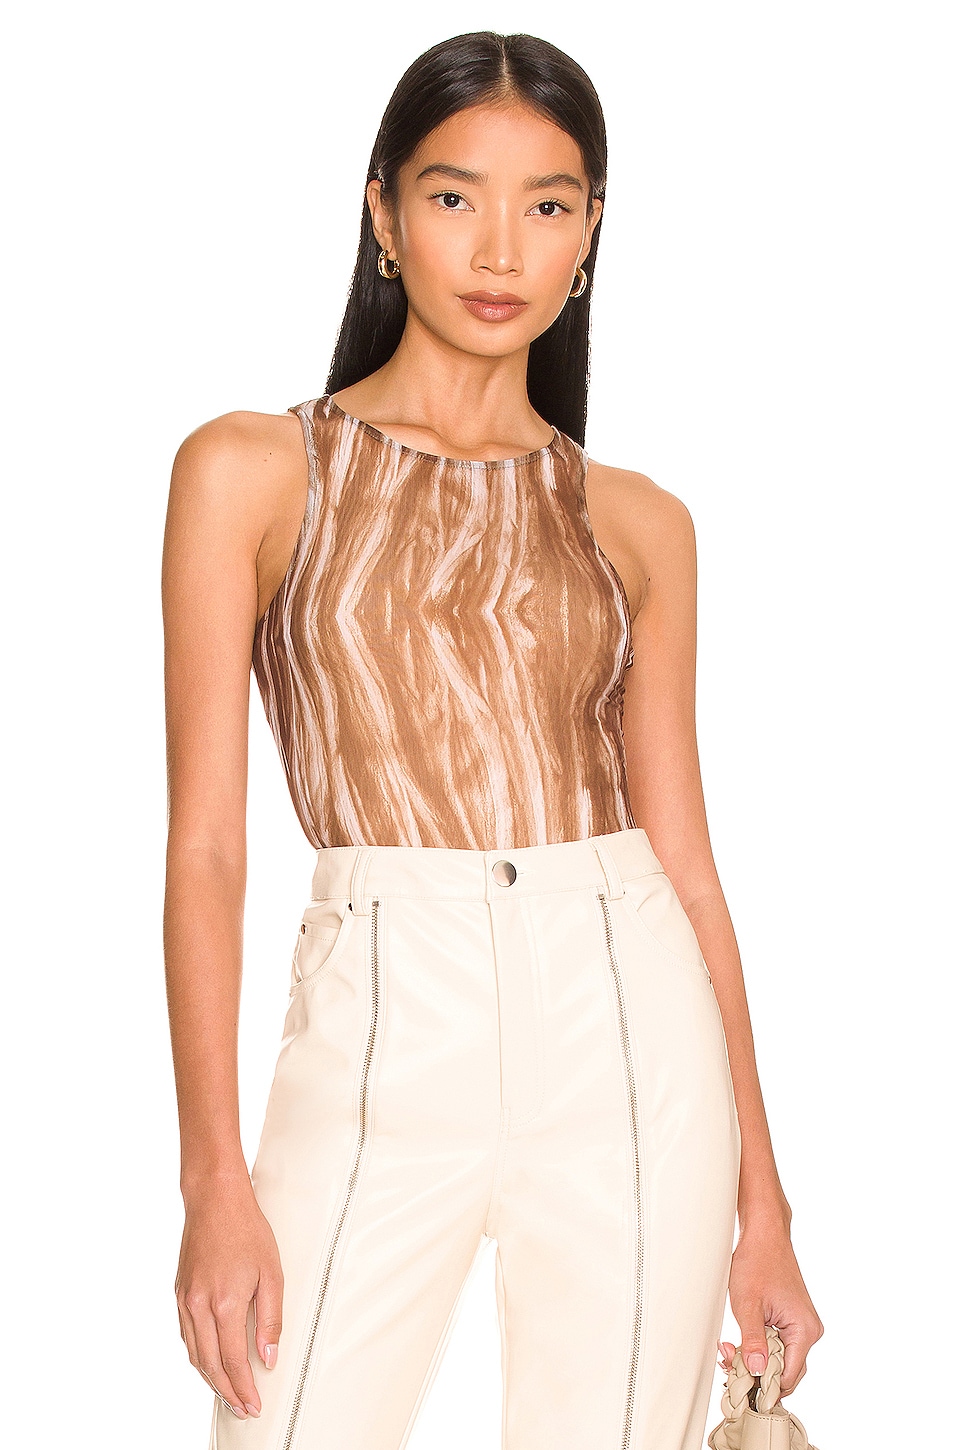 CAMI NYC Darby Bodysuit in Cordial